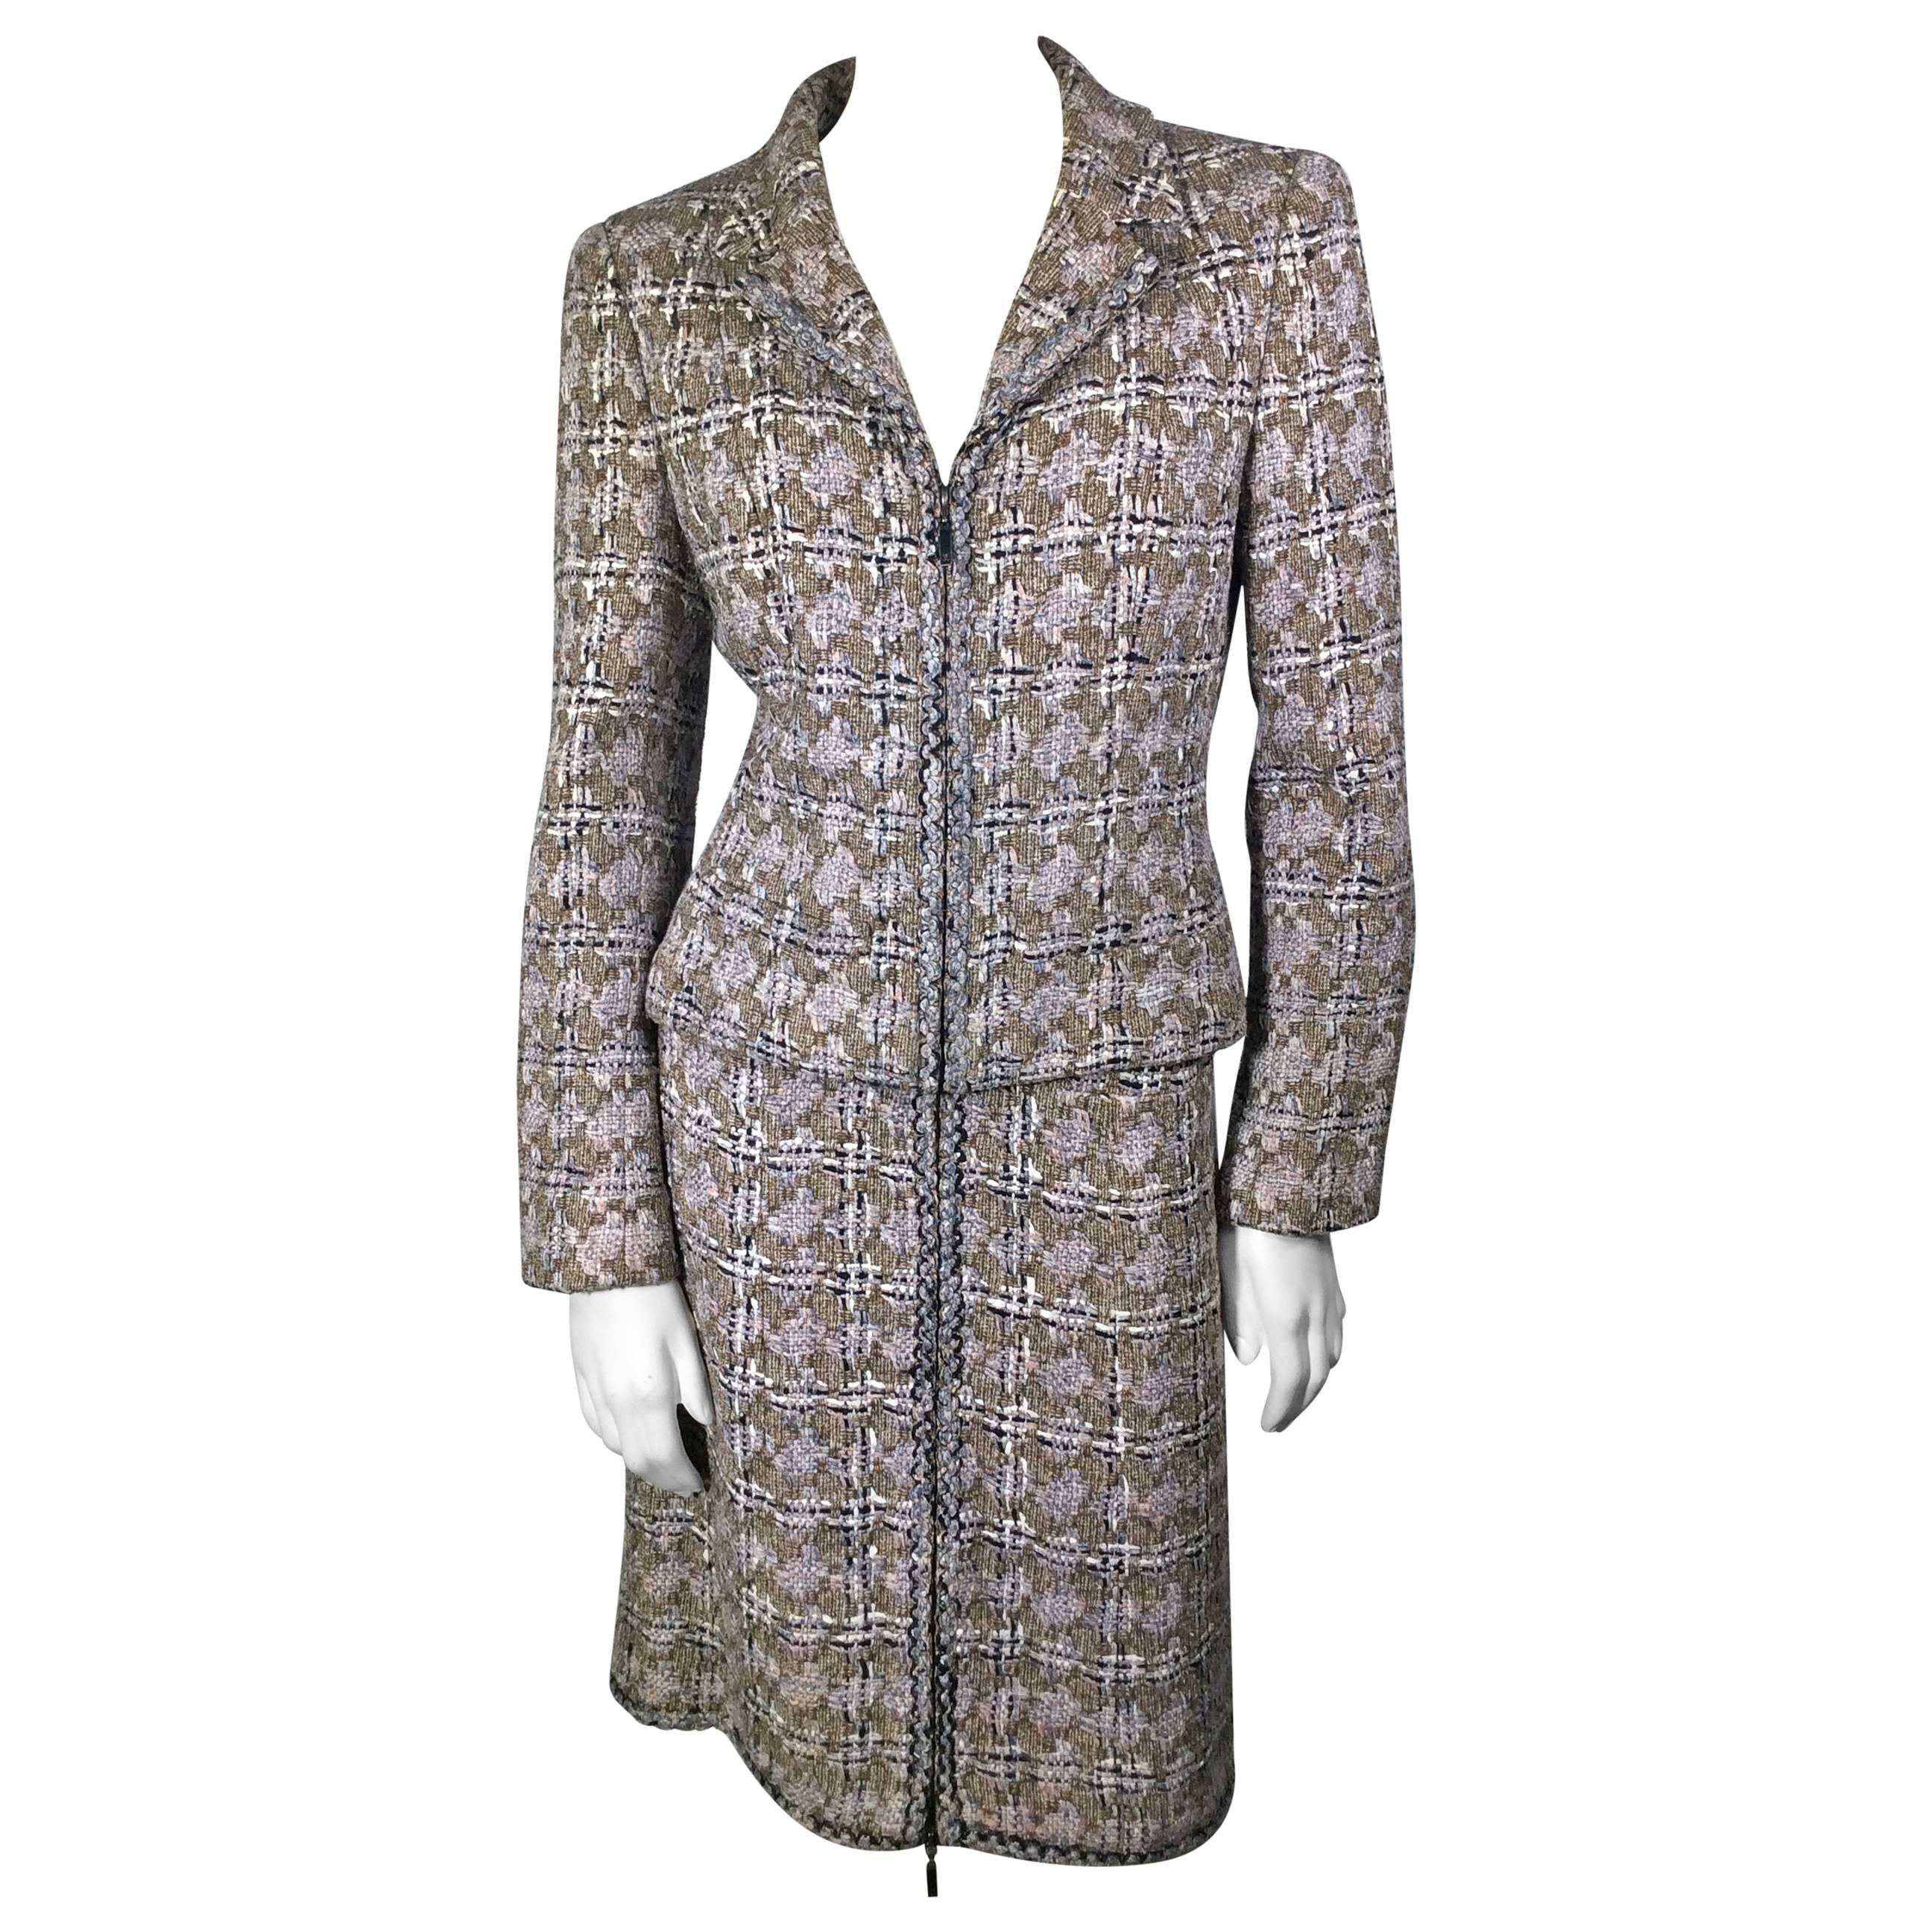 HOLIDAY FLASH SALE! 50% Off! Chanel Spring 2003 Lavender and Brown Tweed Suit For Sale